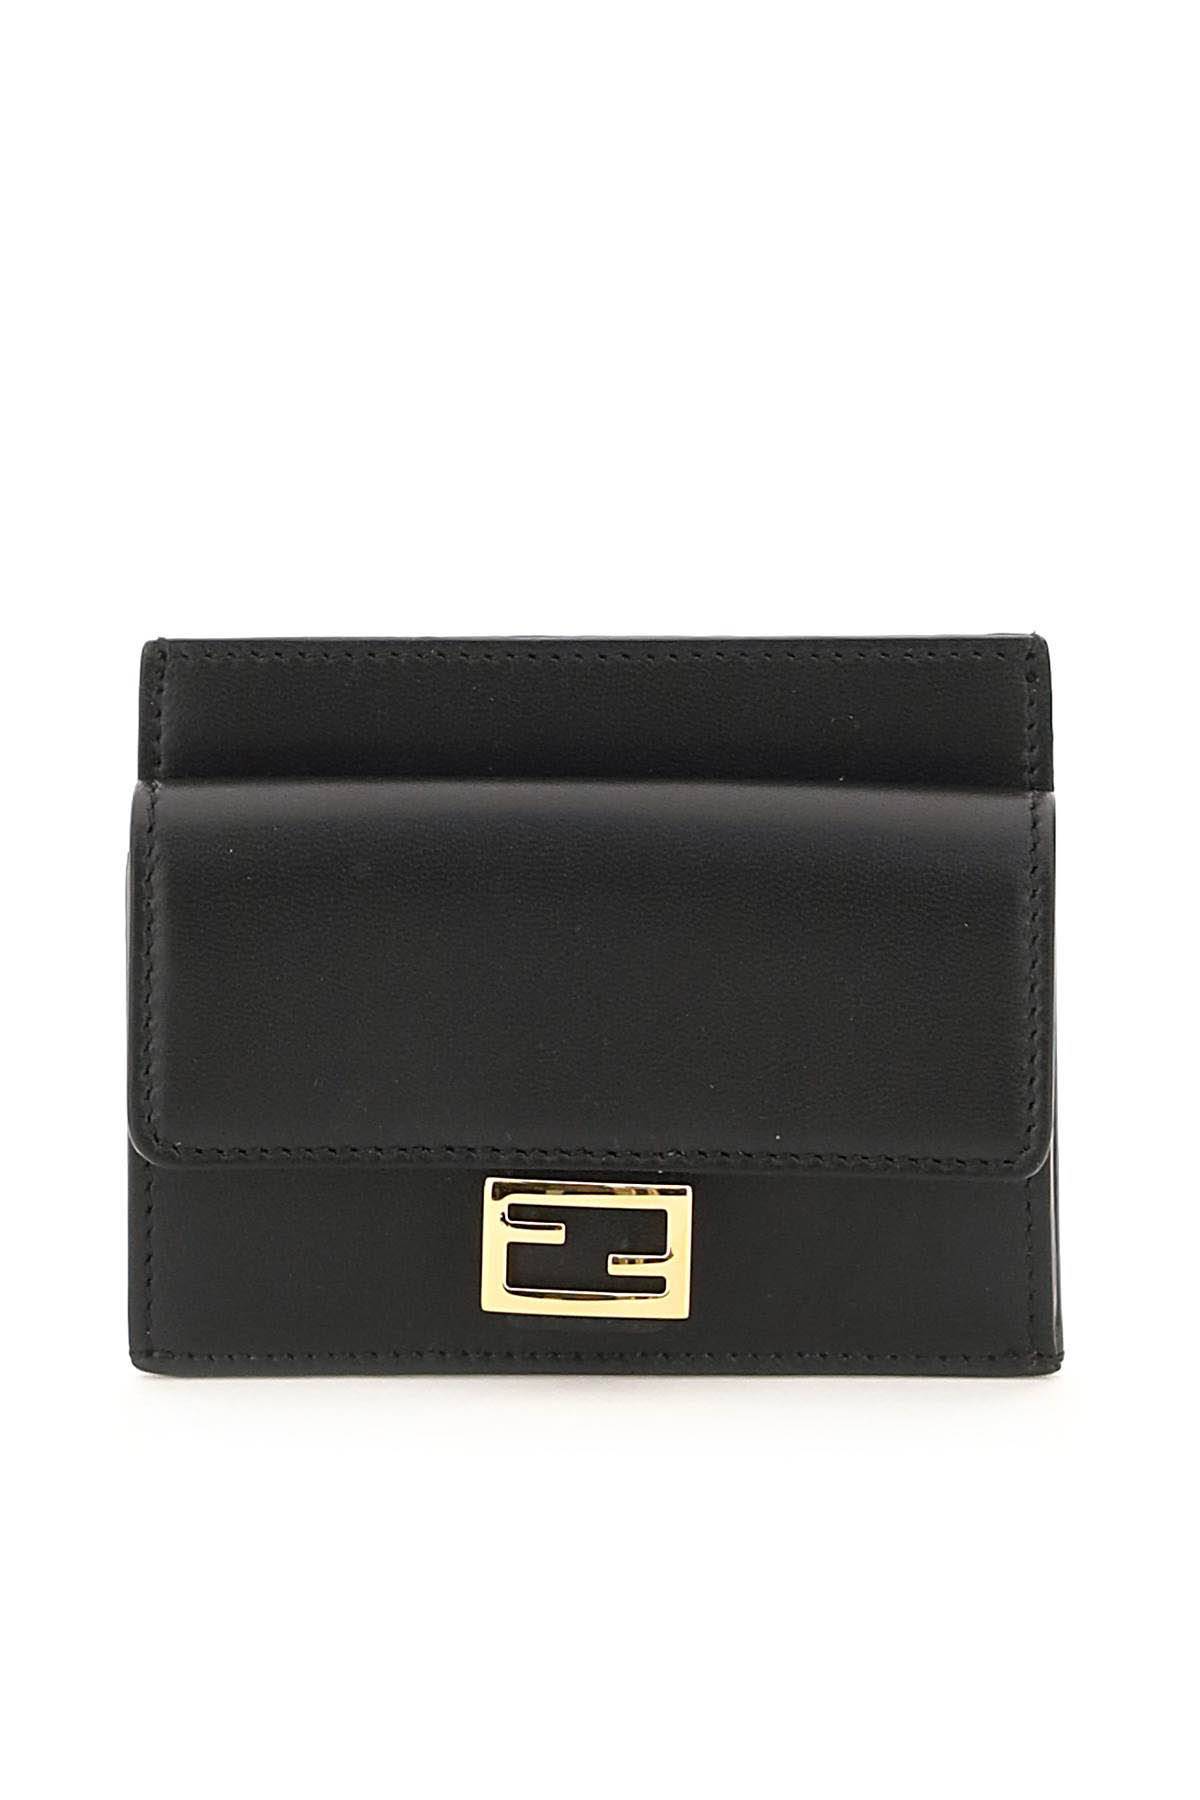 FENDI baguette ff card holder with coin purse